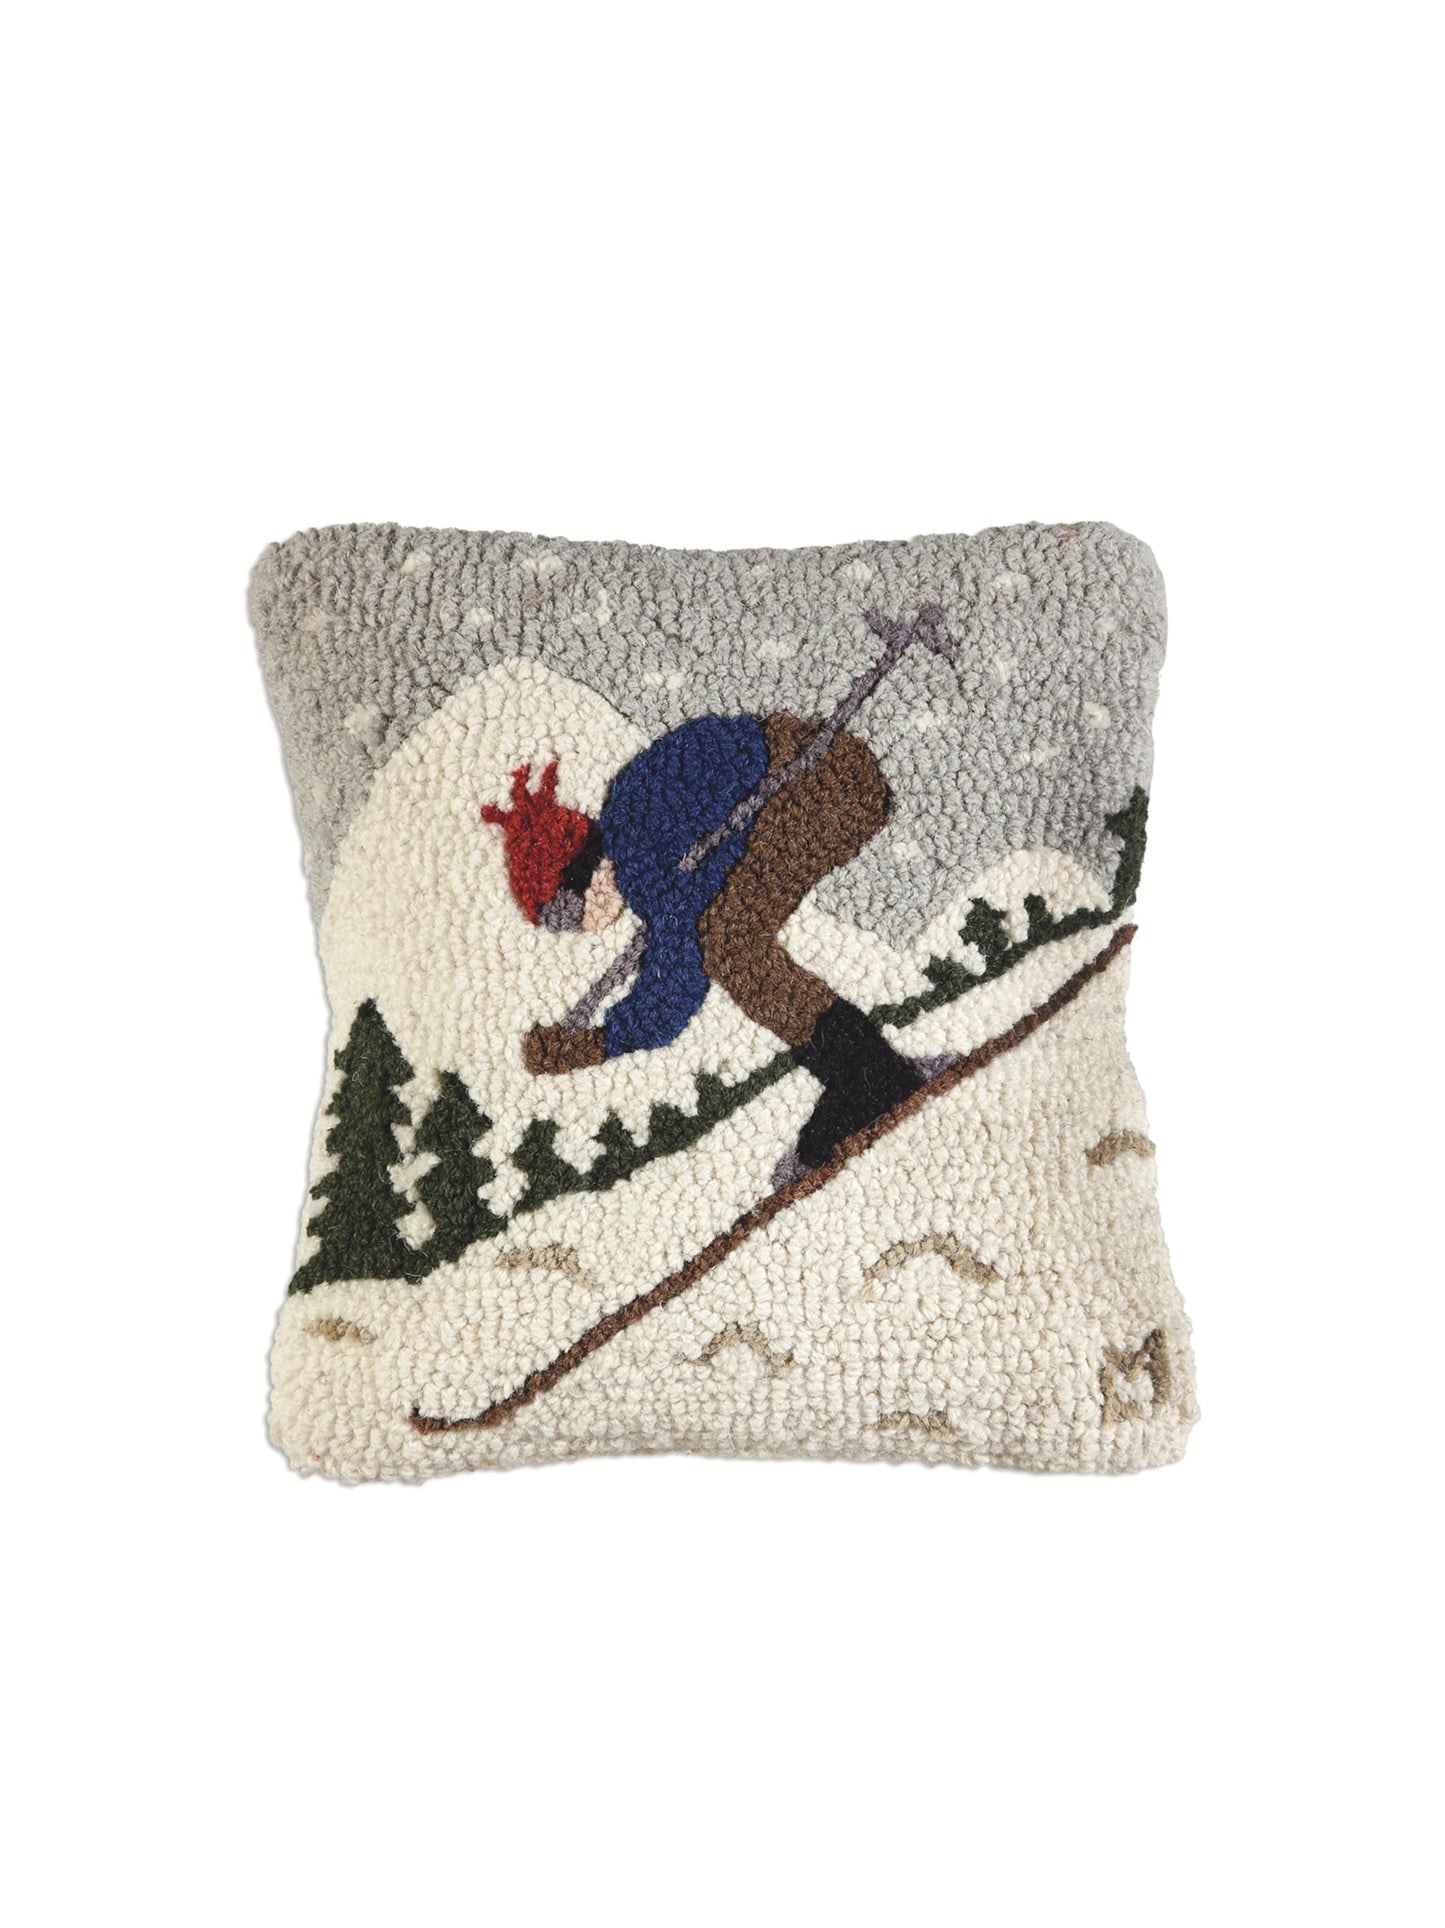 Downhill Skier Hooked Wool Pillow Weston Table